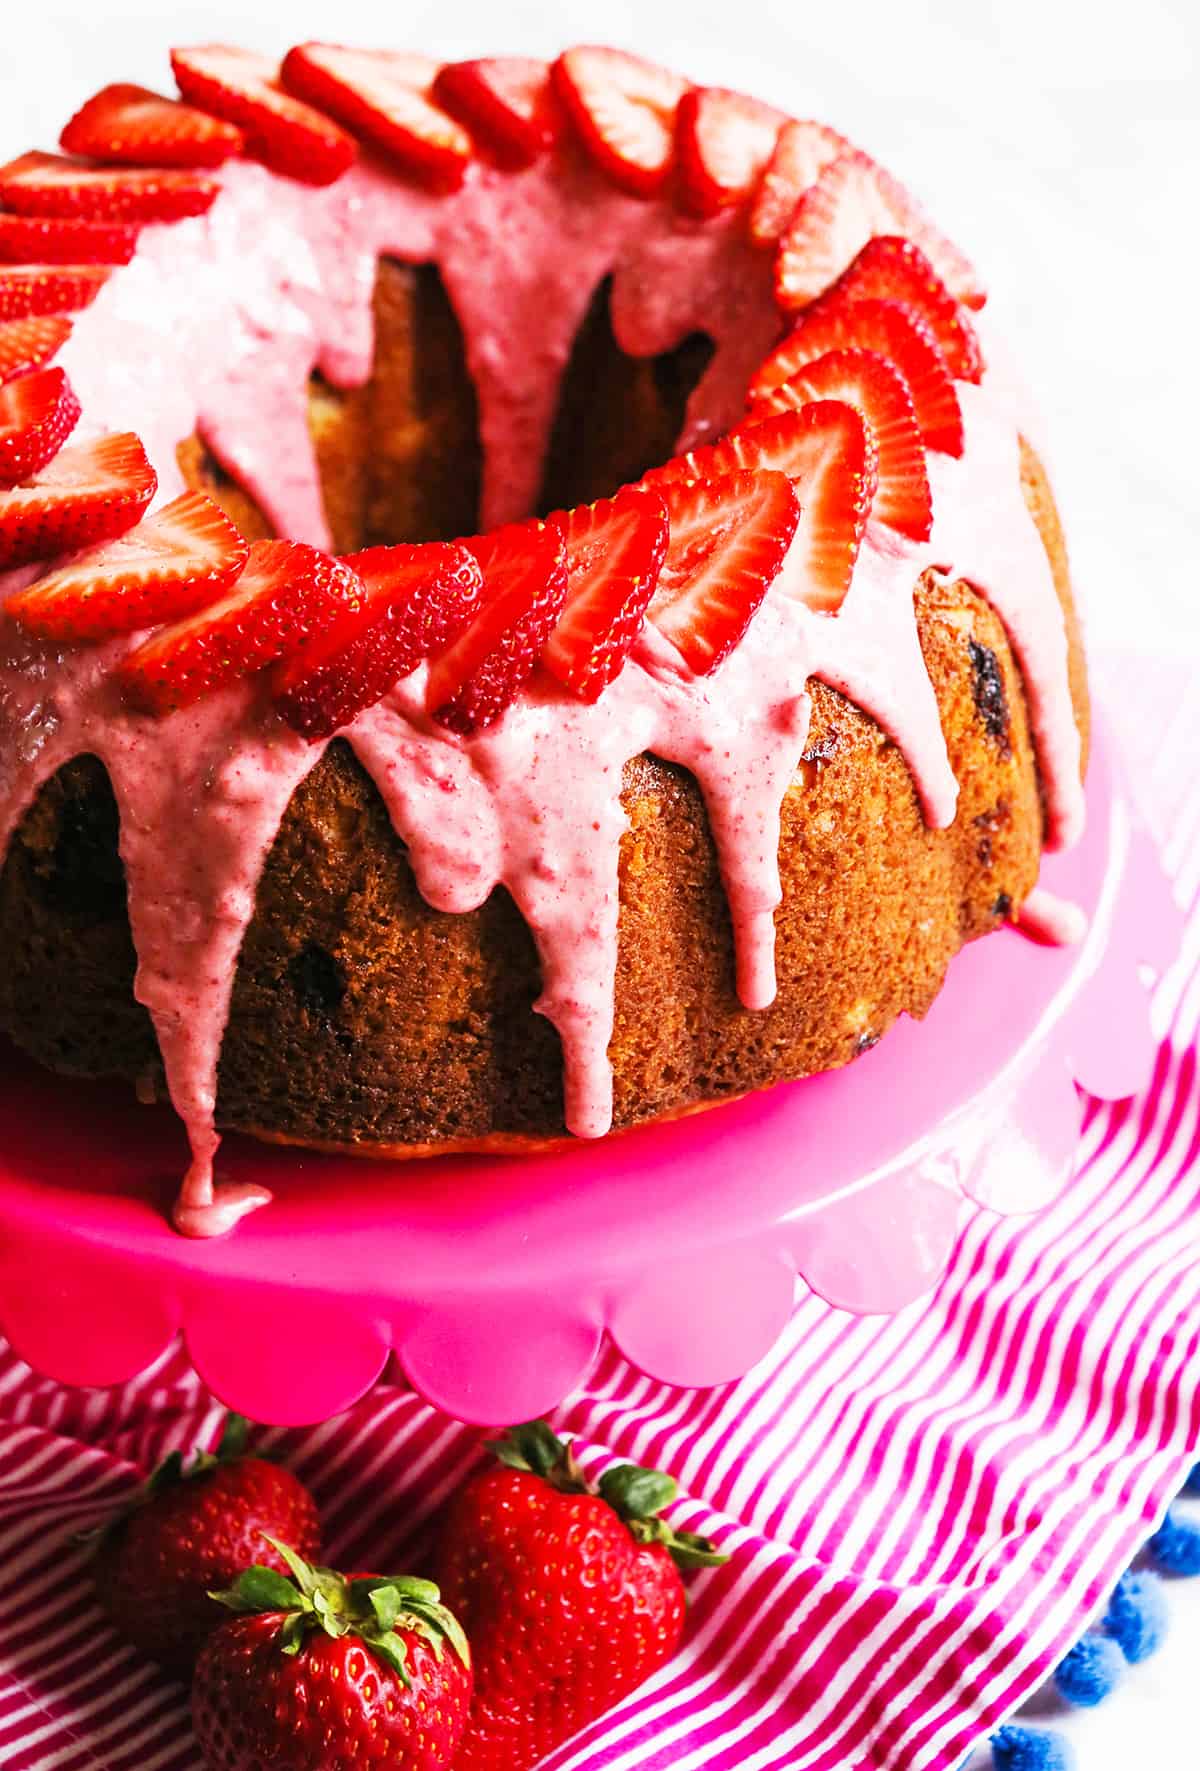 Looking down onto a strawberry bundt cake drizzled with glaze and topped with fresh strawberry slices.